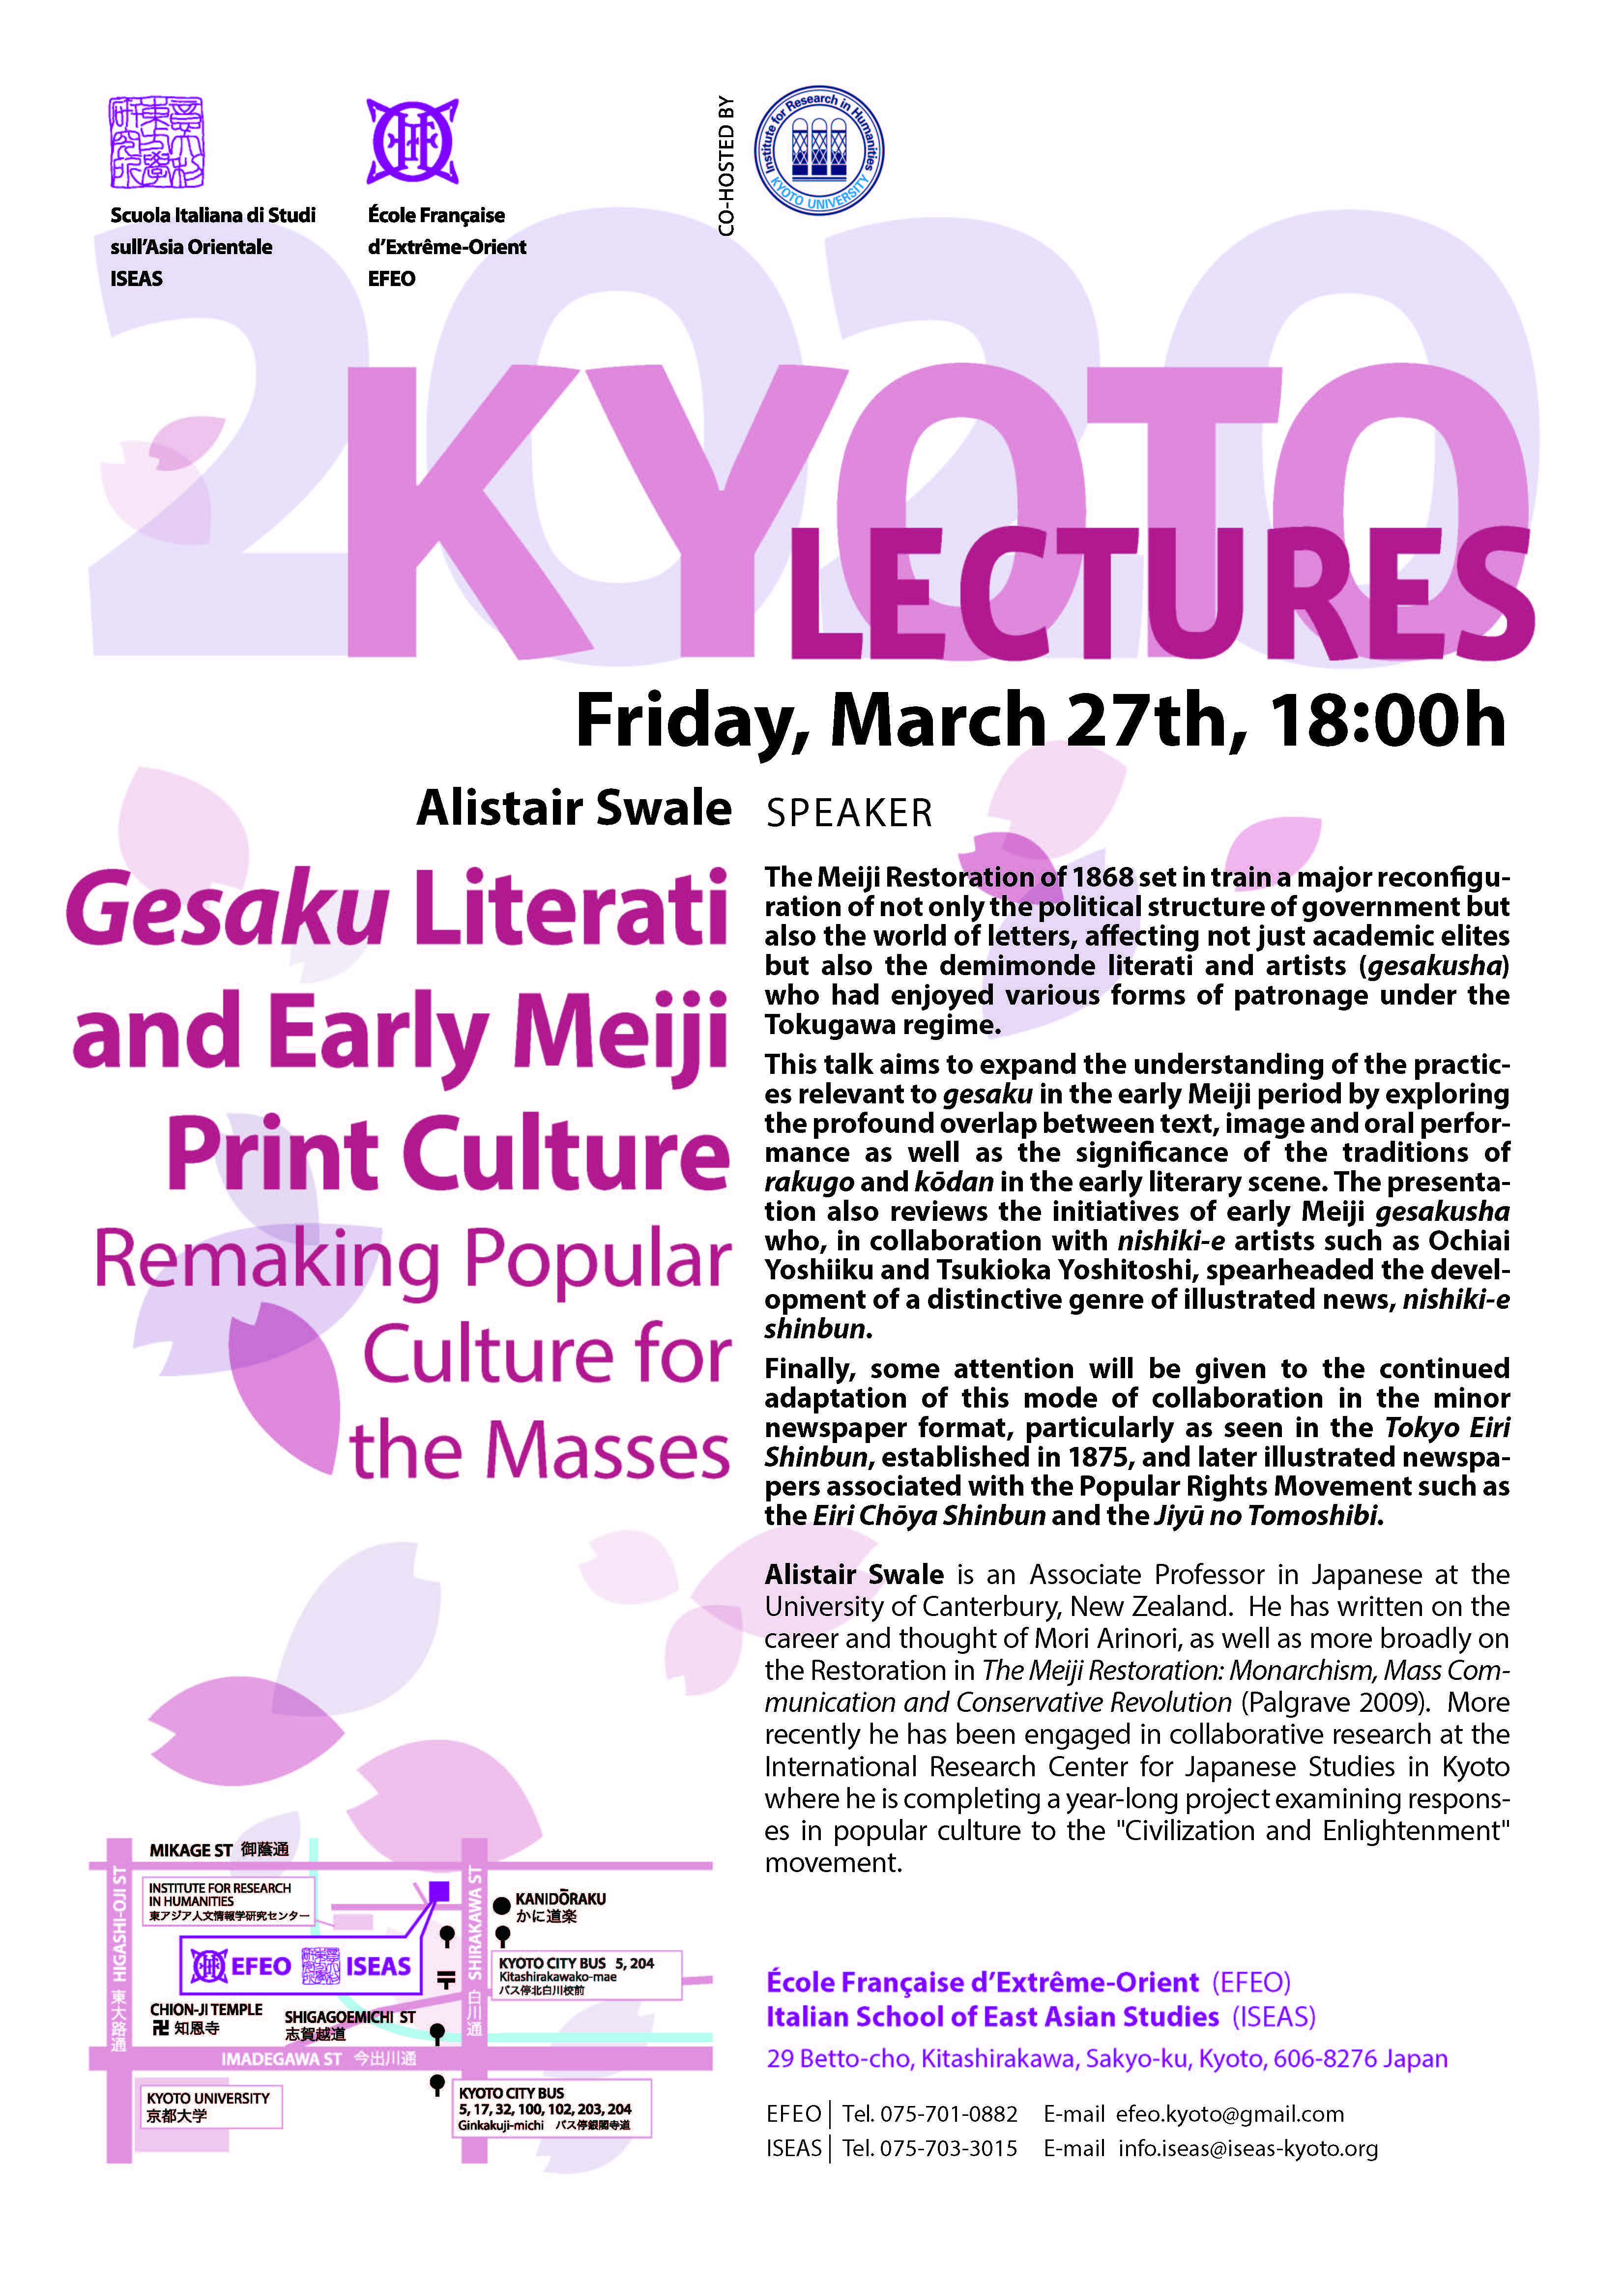 Kyoto Lectures 2020「Art, Gender, and Community in an Age of Revolution: The Life of a Samurai Housewife and Artist in Kishū Domain, 1830-1880」